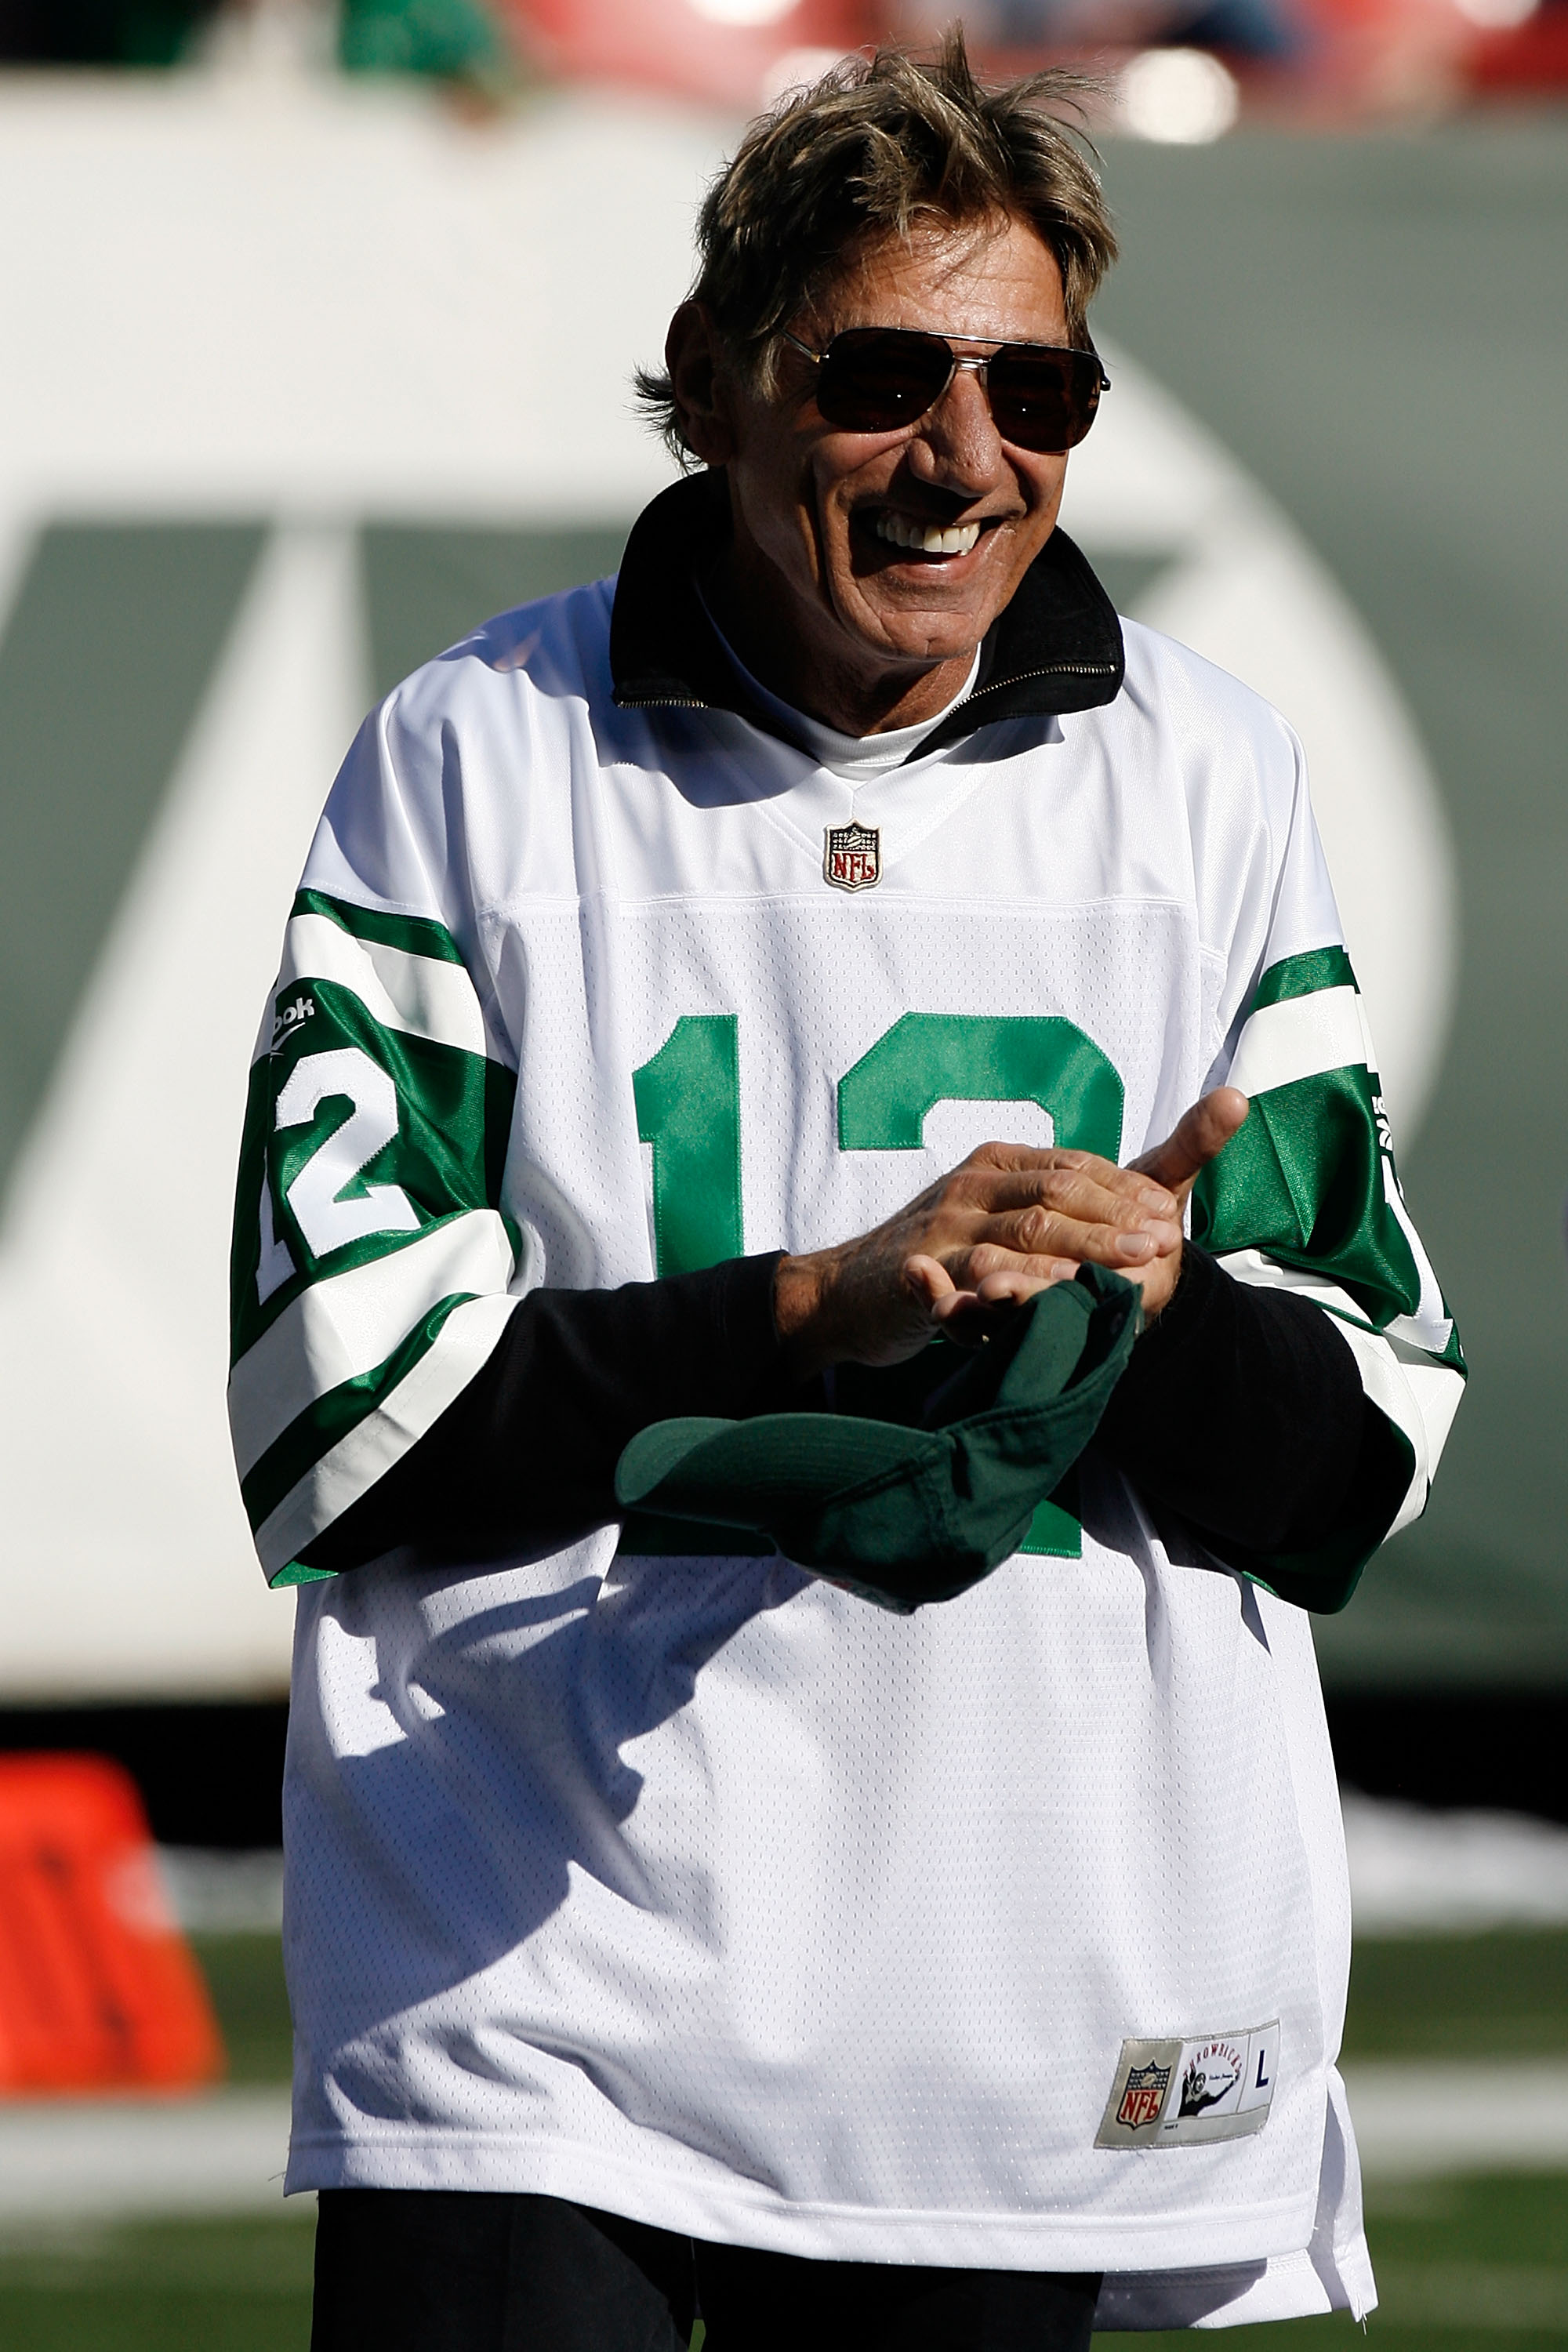 EAST RUTHERFORD, NJ - OCTOBER 26:  Former Jets quarterback is introduced during halftime festivities celebrating the 40th anniversary of the Jets' win over the Colts in Super Bowl III during the game between the Kansas City Chiefs and the New York Jets on